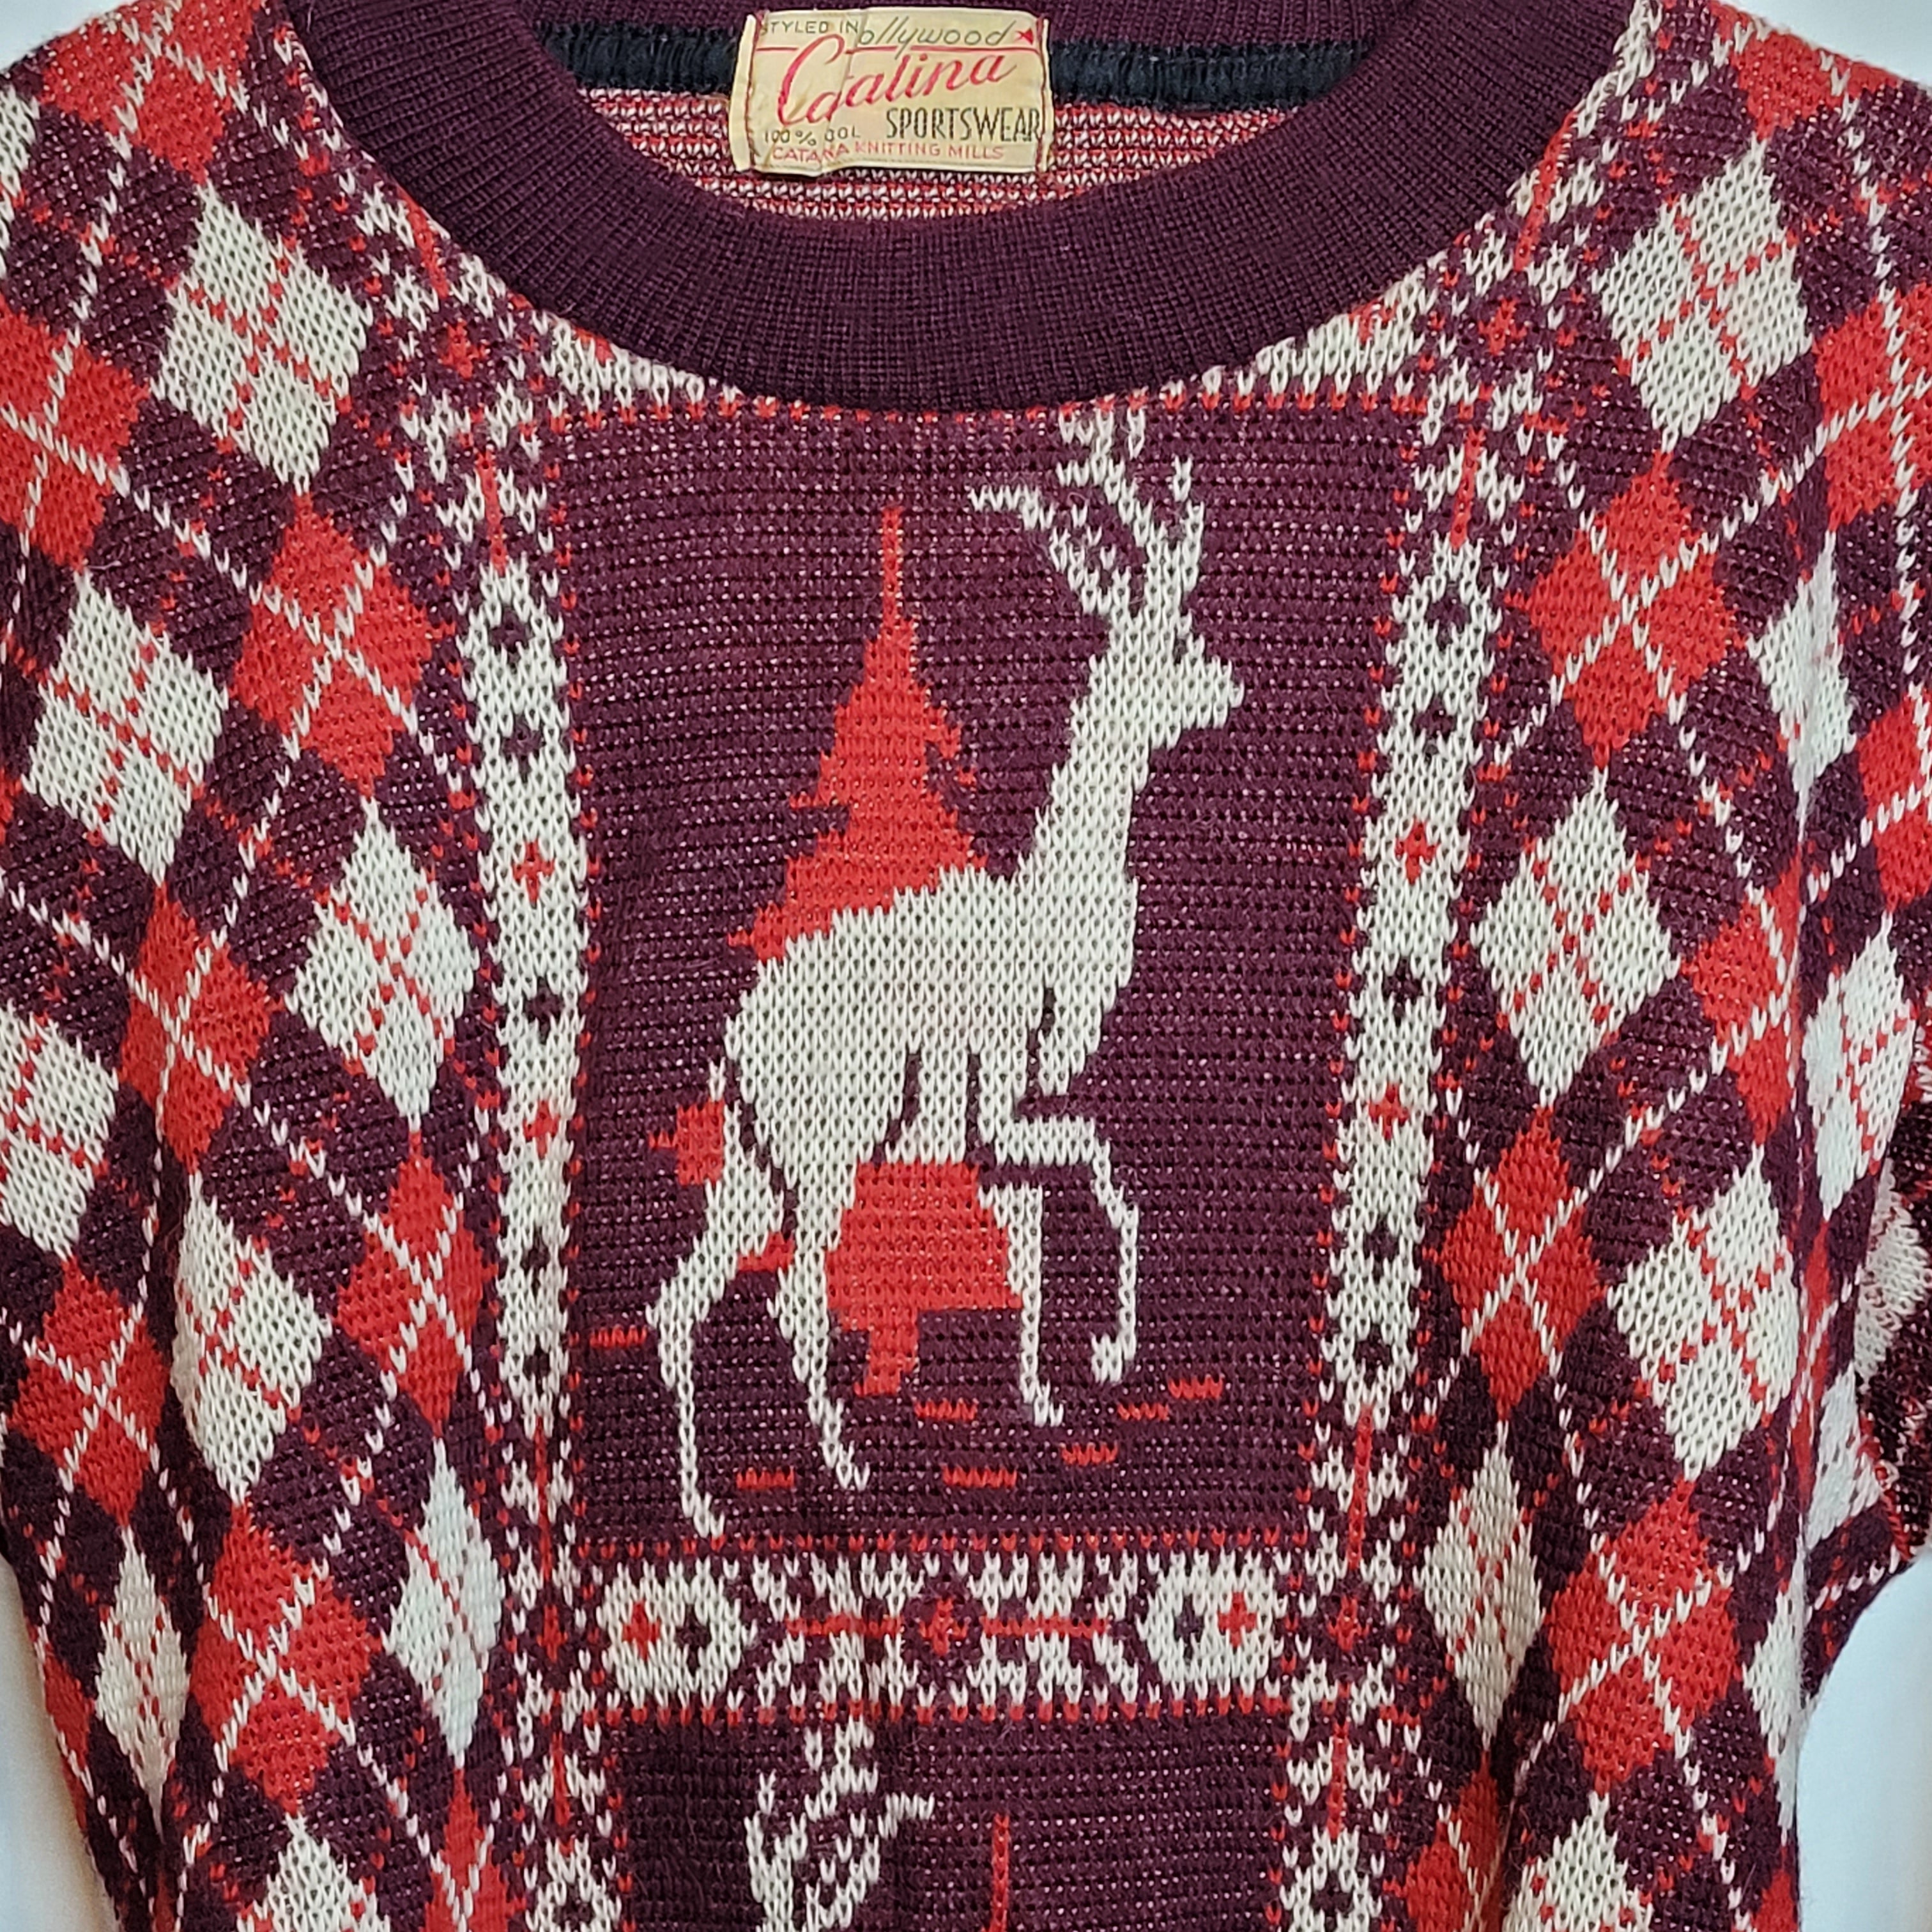 Ugly Christmas Sweater Vintage Tacky Holiday Party Merry Santa Classic  Tultex Medium 80s 90s Xmas Rudolph The Red Nosed Reindeer Made USA